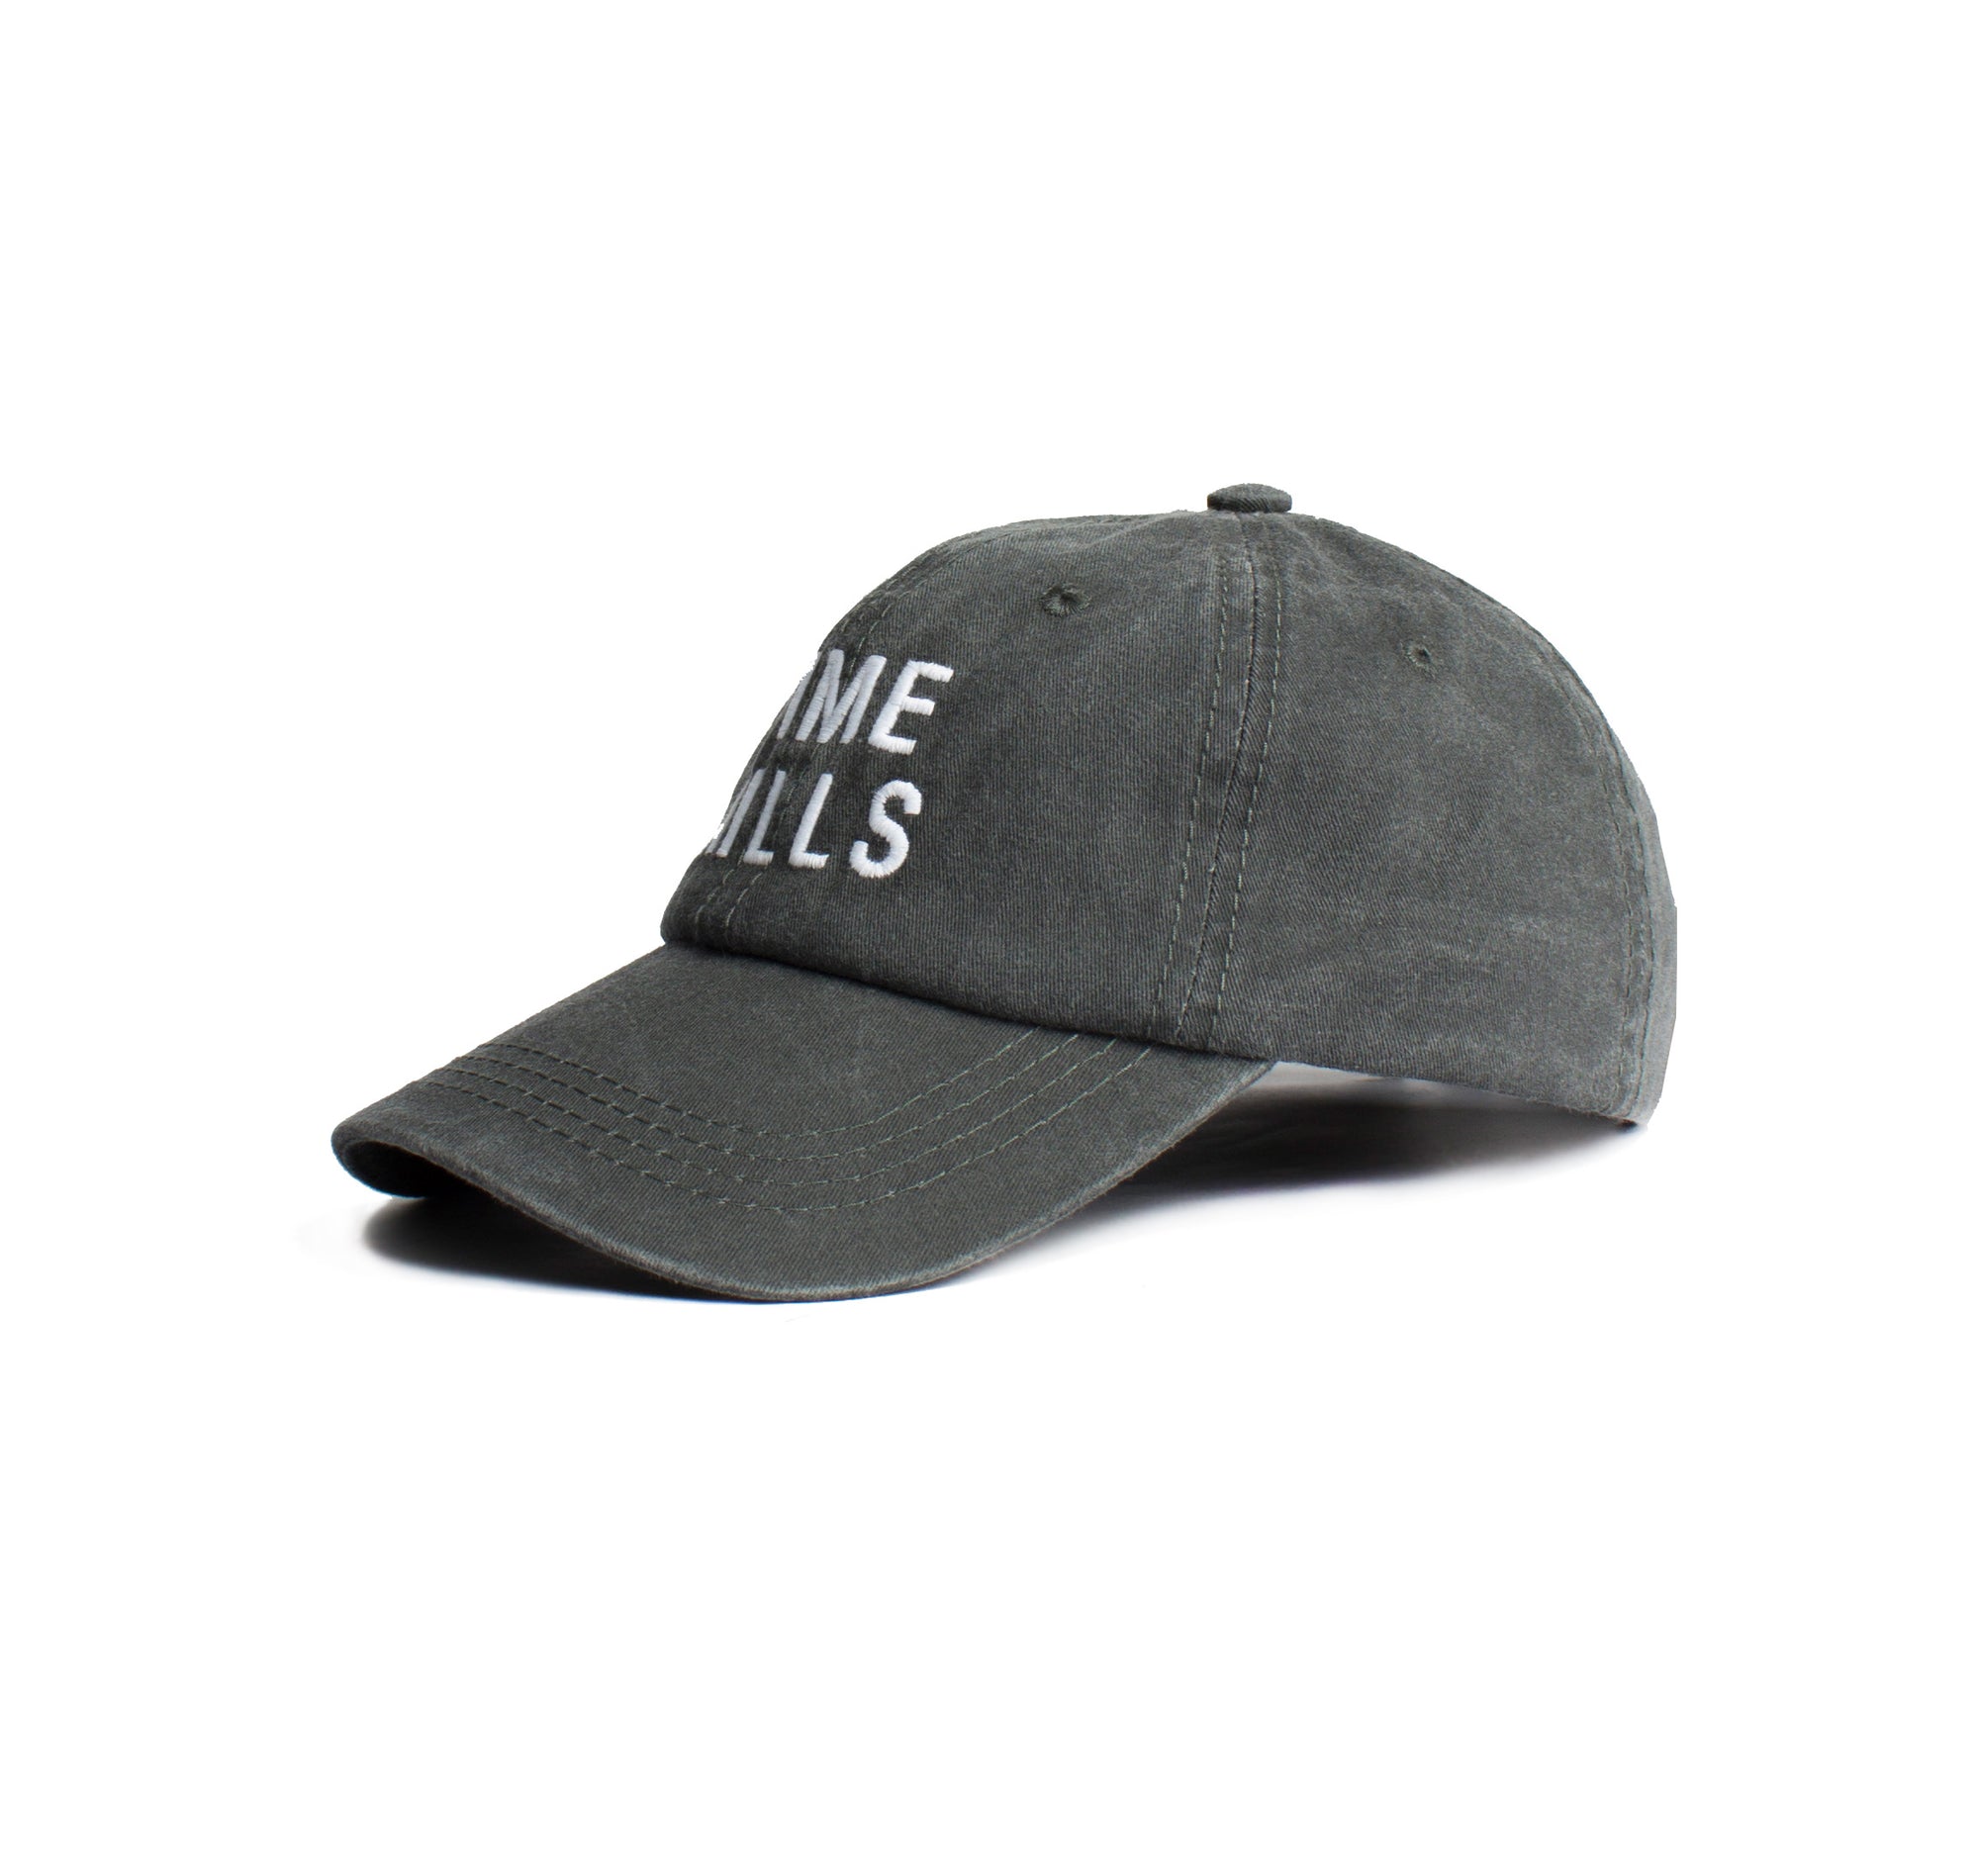 Time Kills Embroidery  Cap